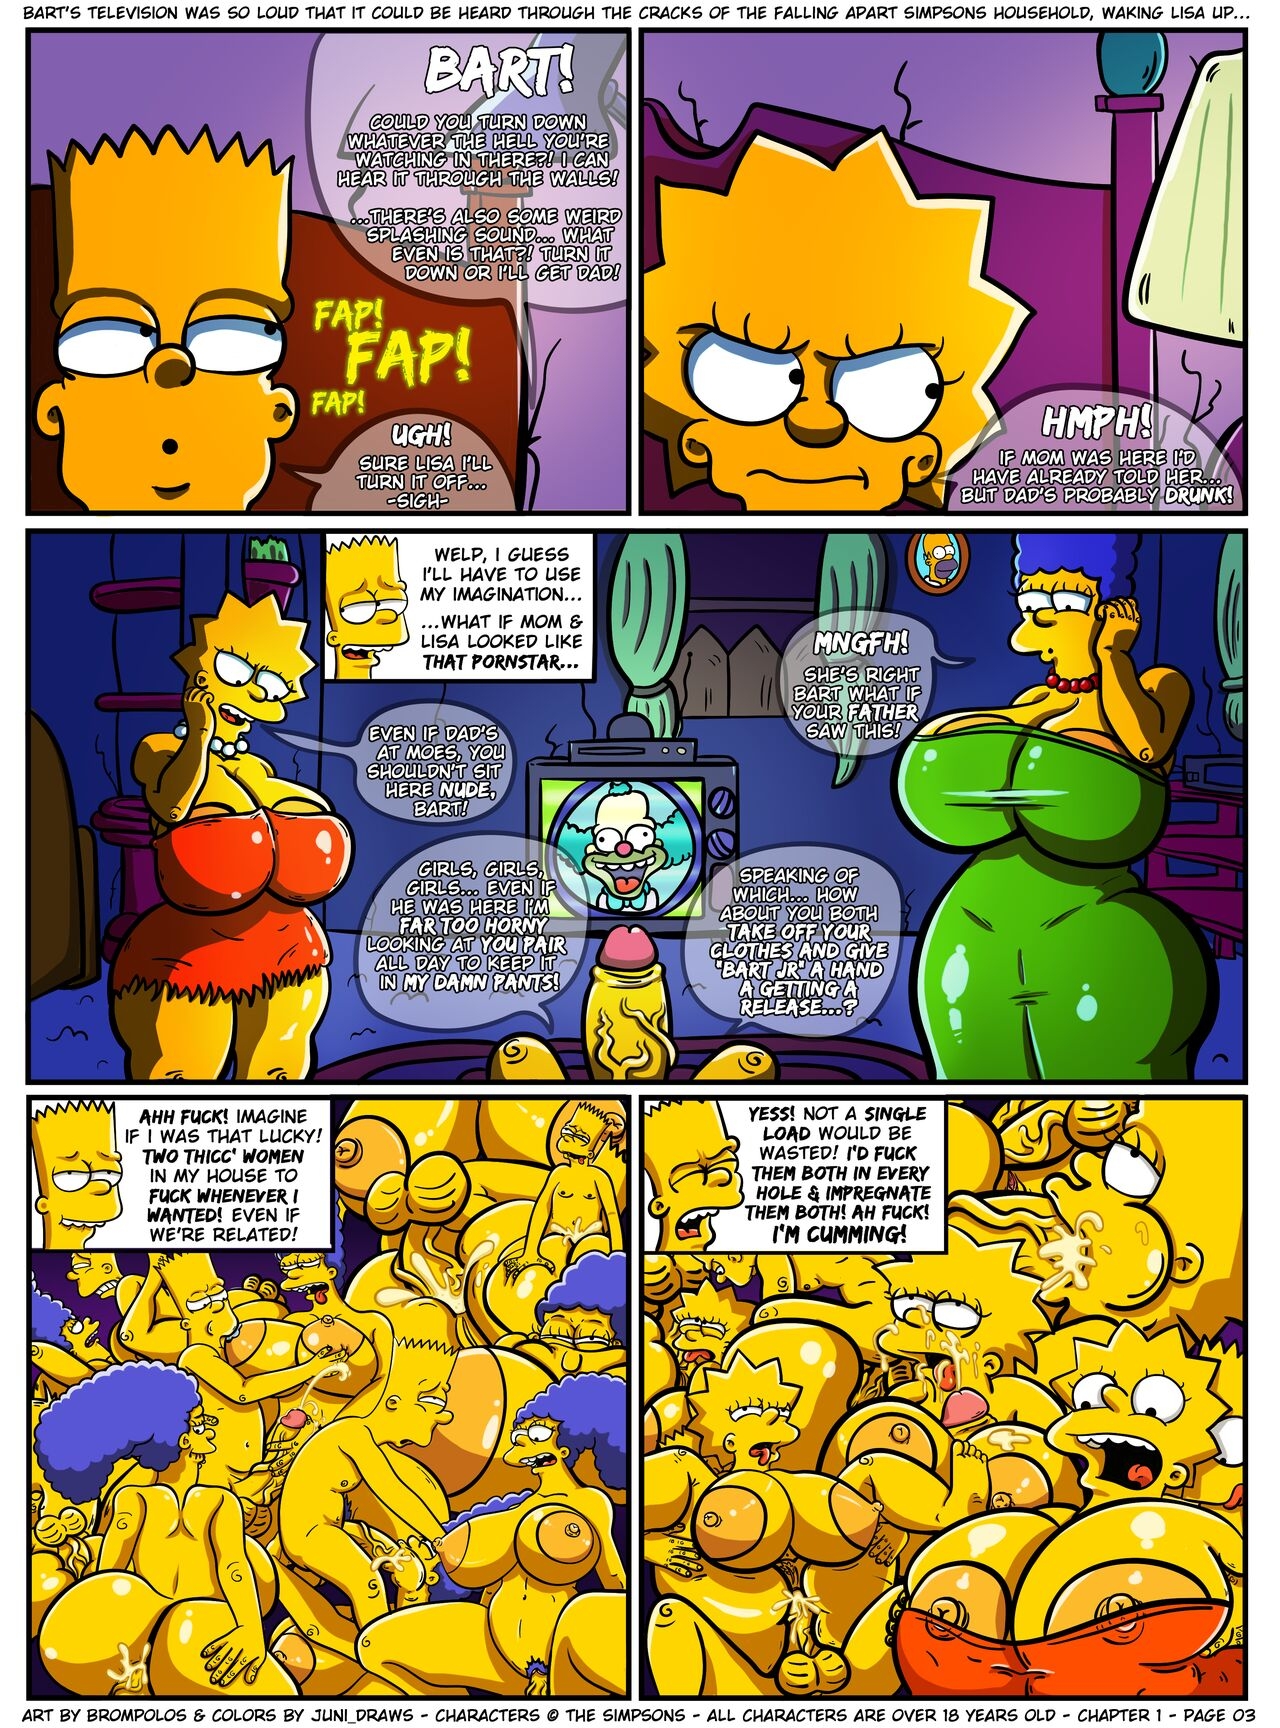 [Brompolos/Juni_Draws] The Sexensteins (Simpsons) [Ongoing] 3